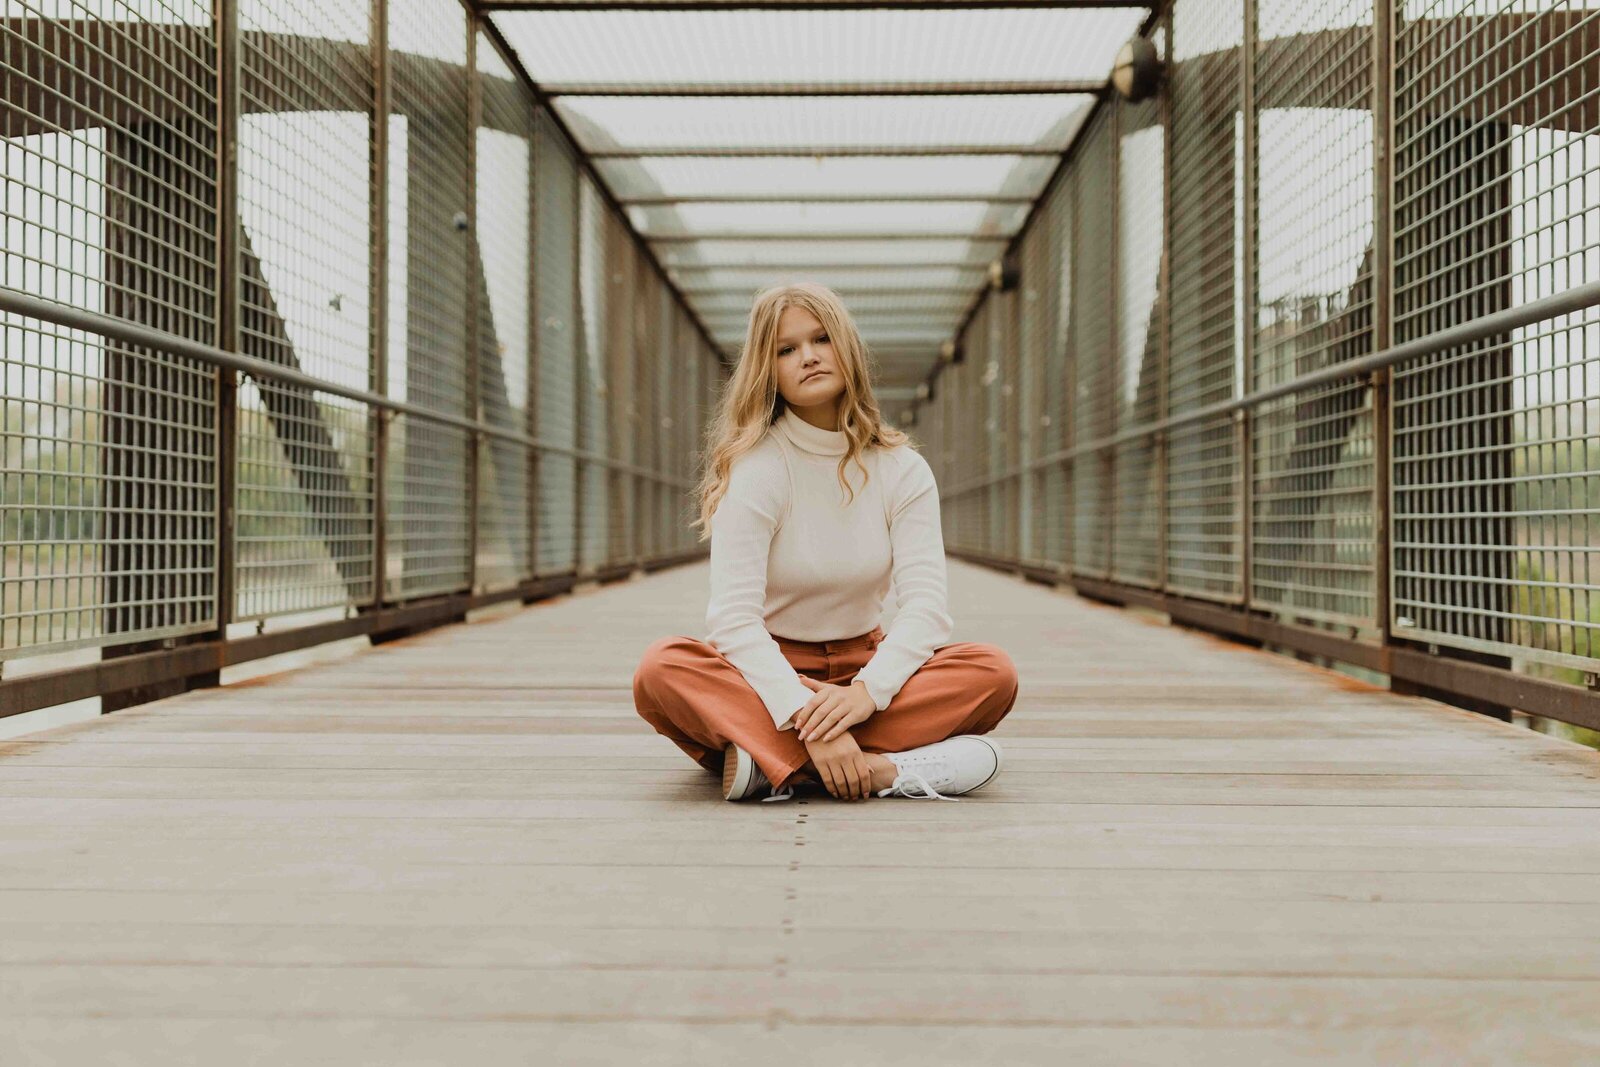 Senior girl sitting in the middle of walking bridge, legs crossed and looking straight into camera.